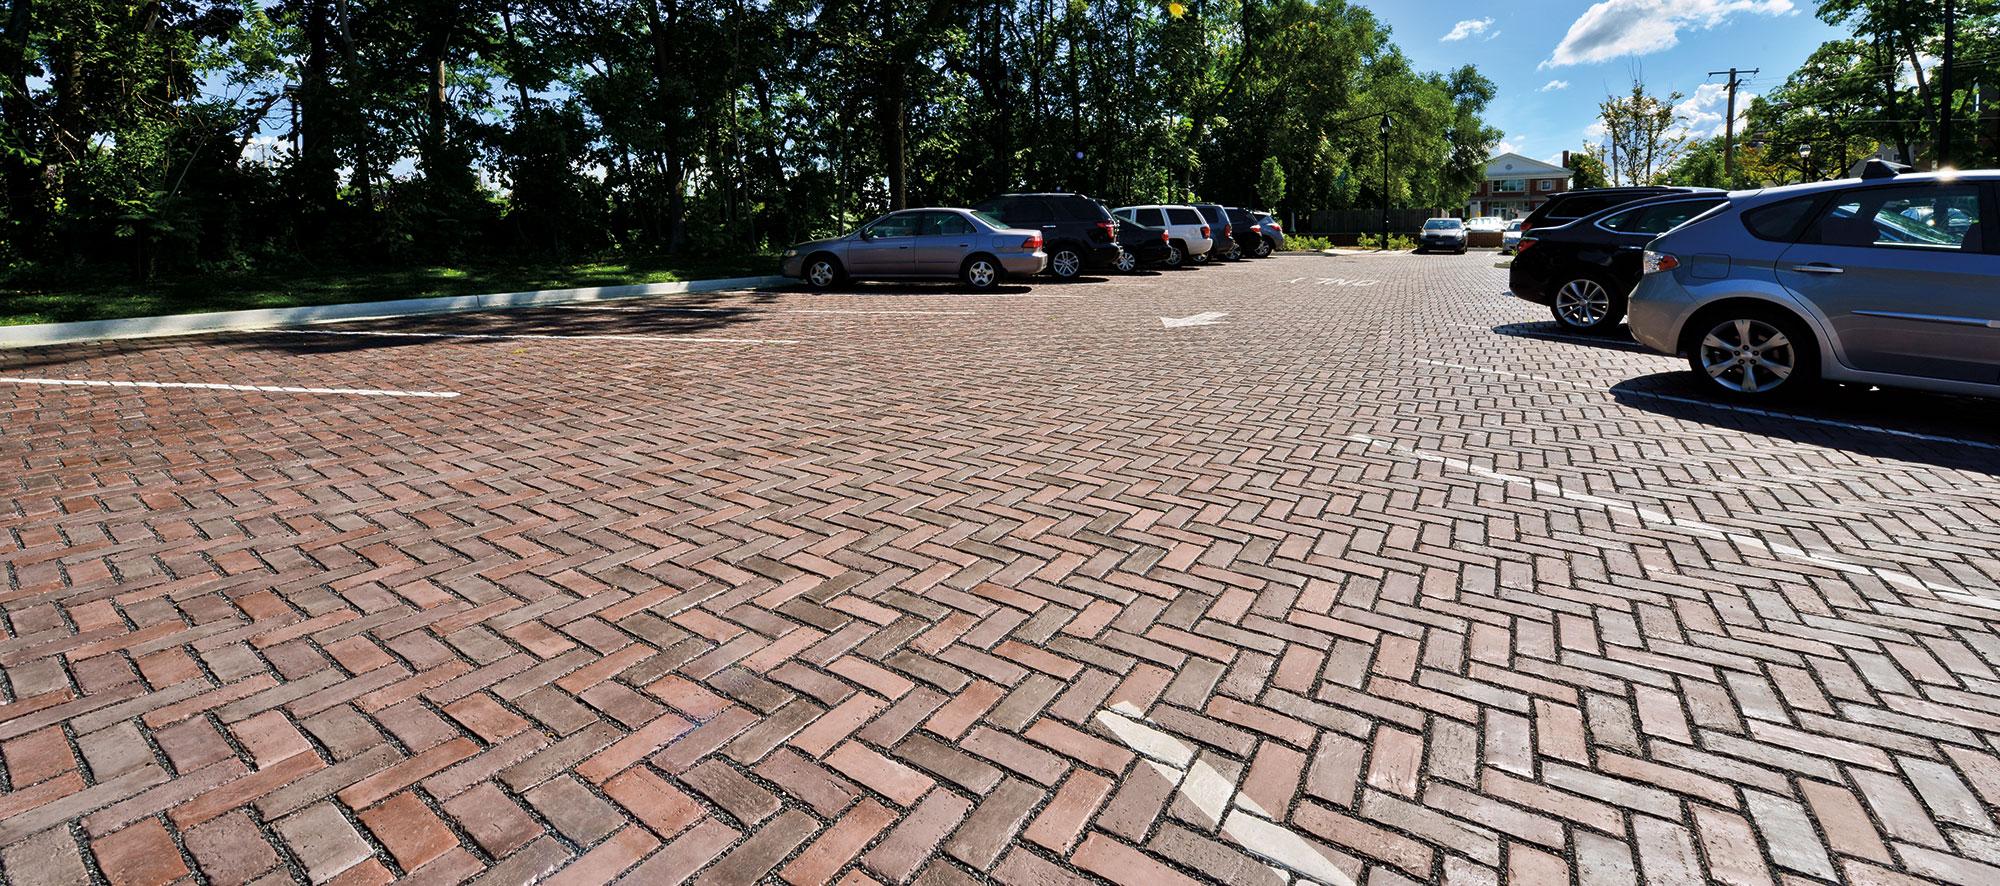 Painted white arrows and parking lines cut through the herringbone pattern of tri-colored Town Hall pavers.